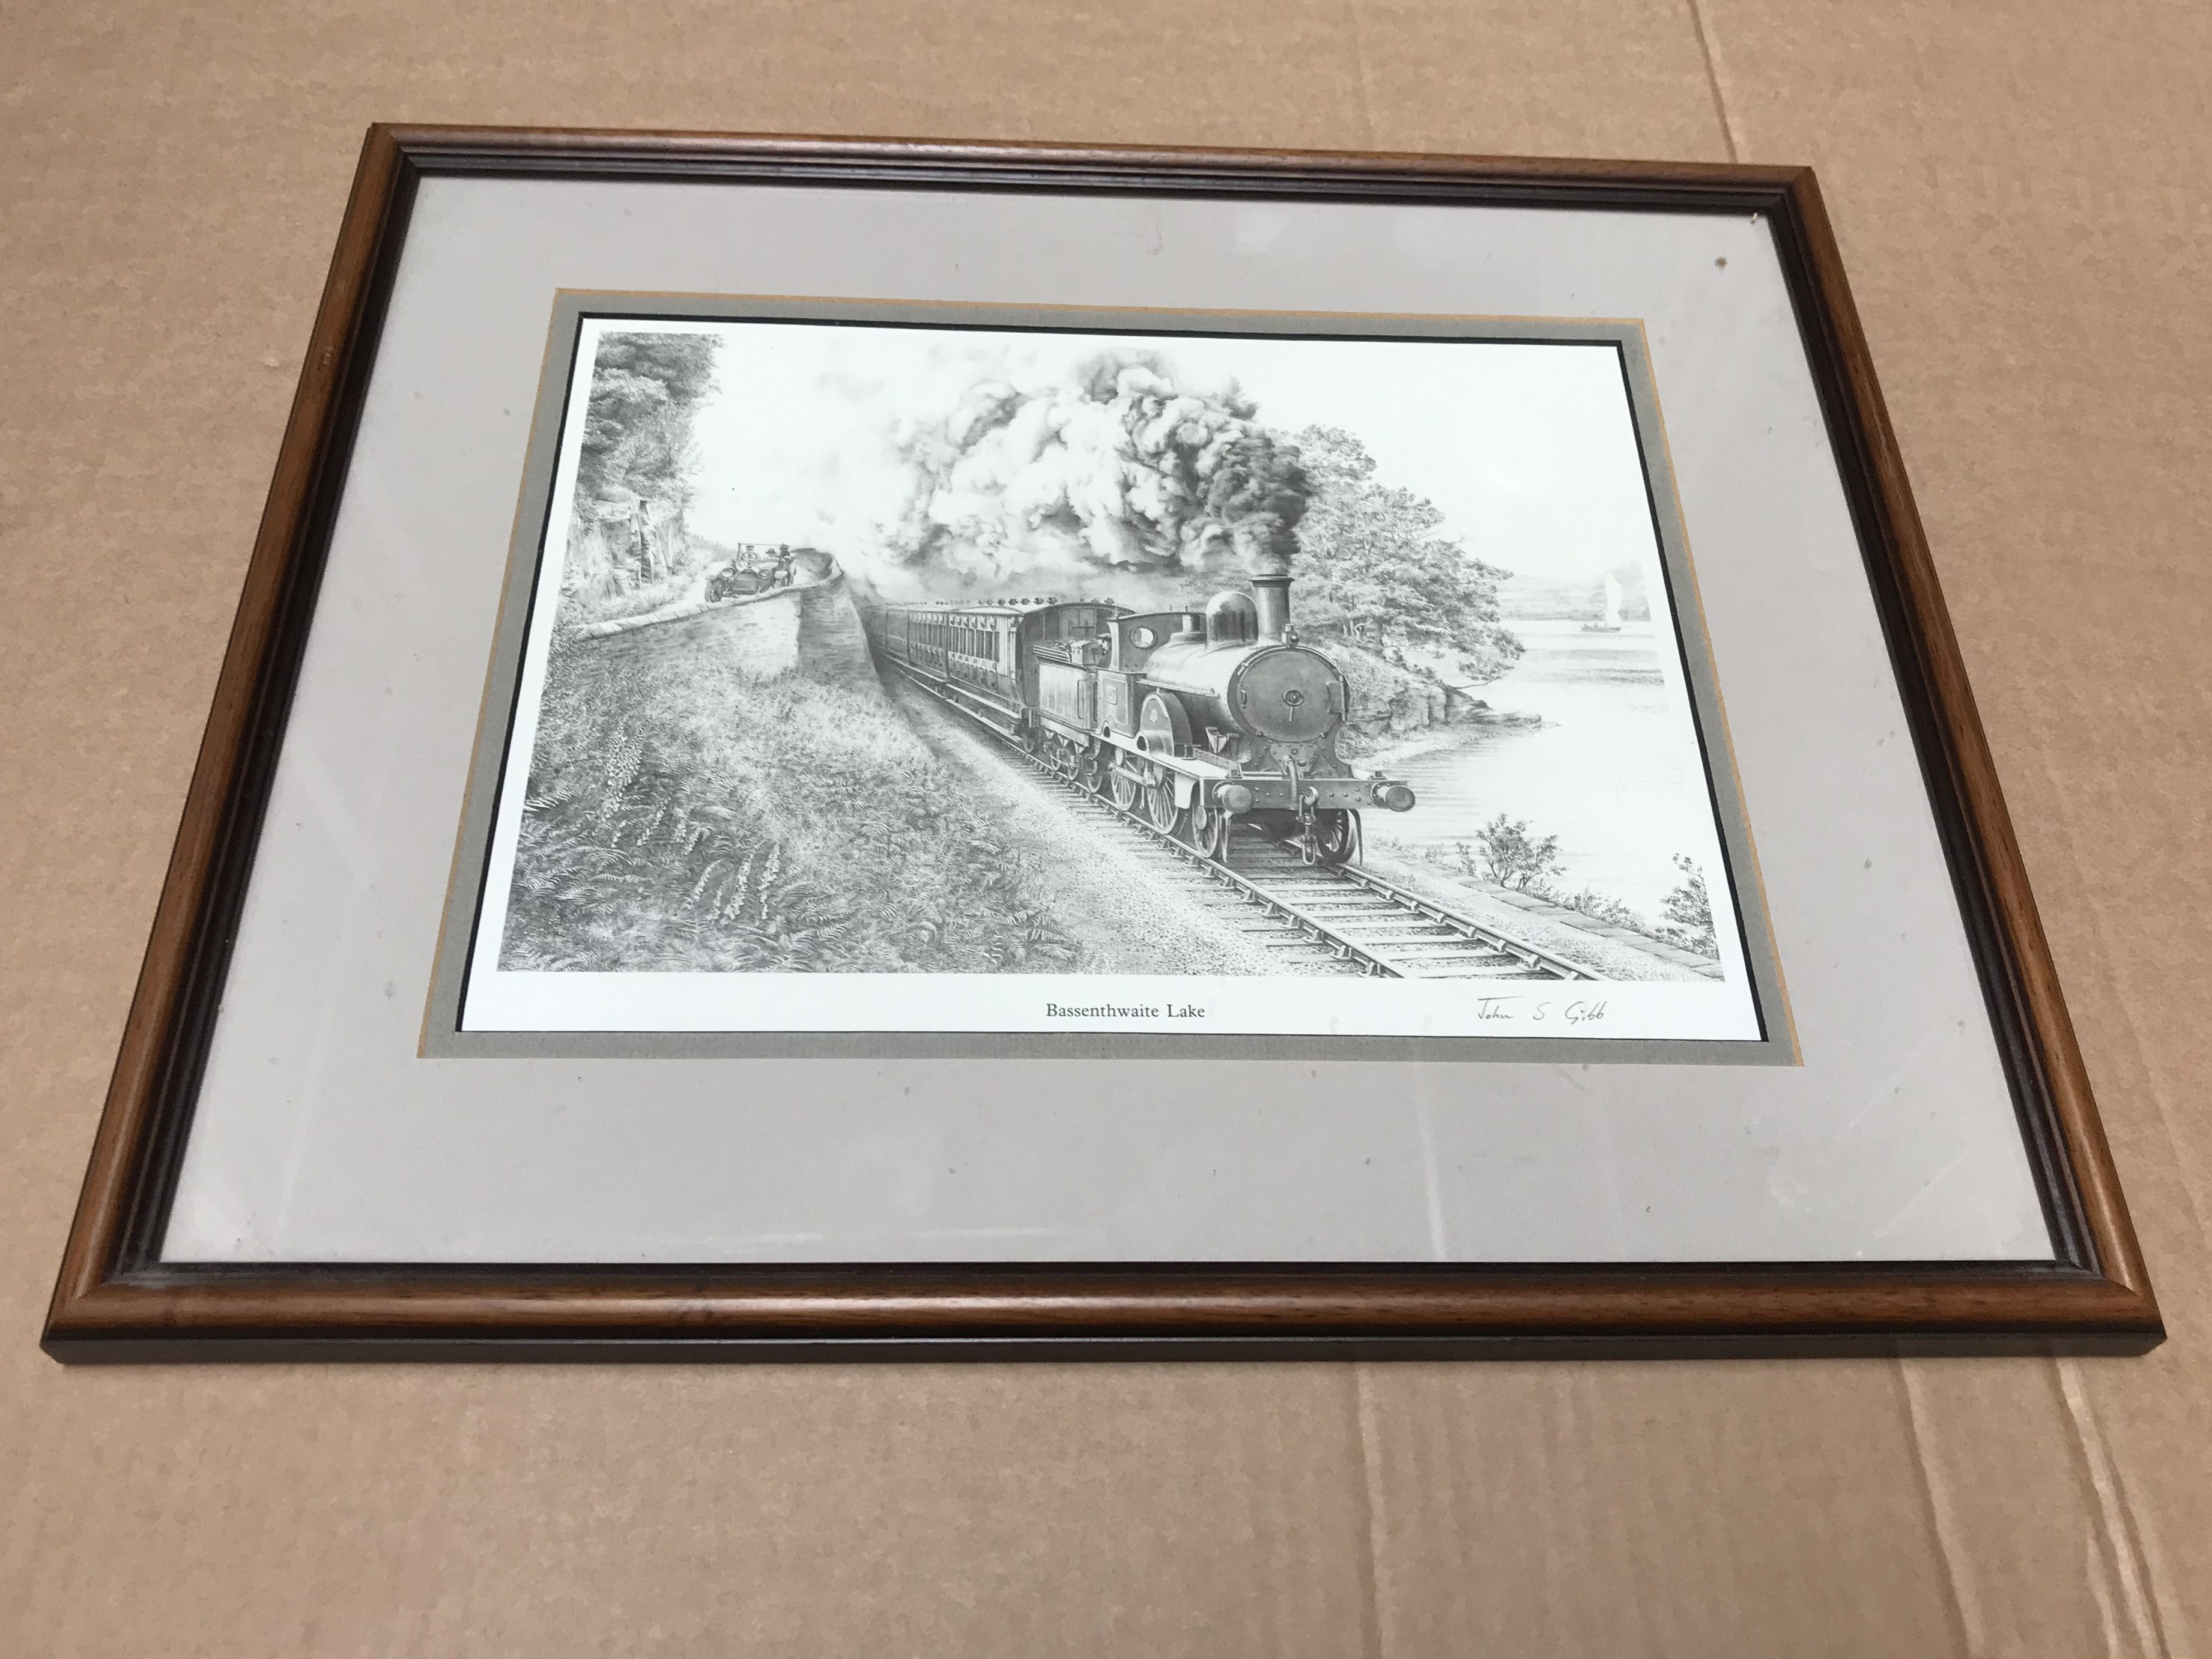 SELECTION OF SIX RAILWAYS RELATED LIMITED EDITION PRINTS SIGNED BY JOHN S GIBB - Image 14 of 18